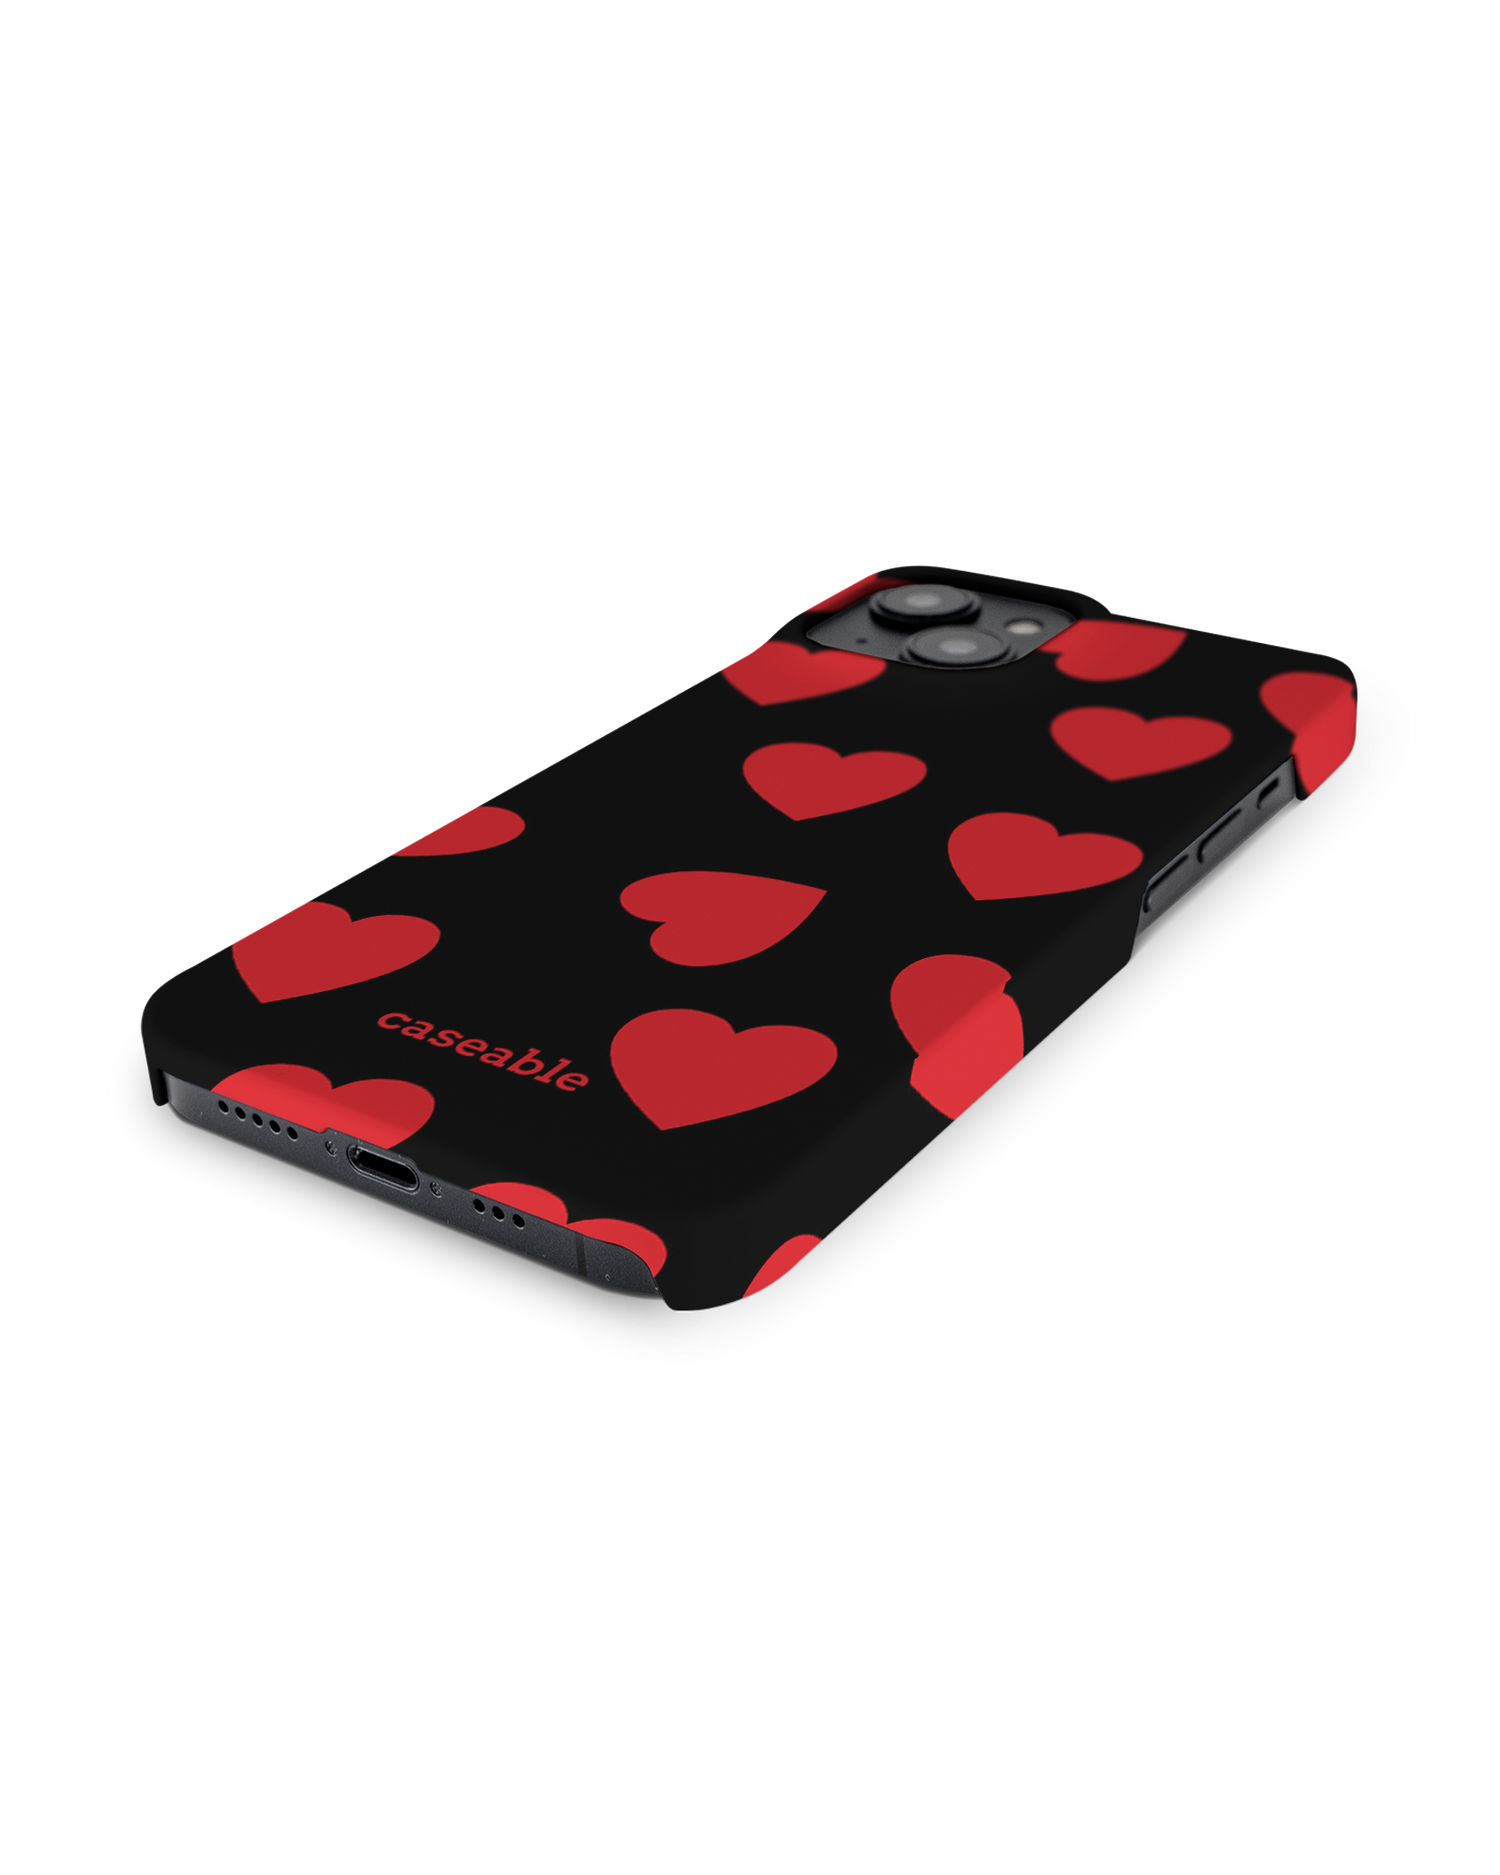 Repeating Hearts Hard Shell Phone Case for Apple iPhone 14: Lying